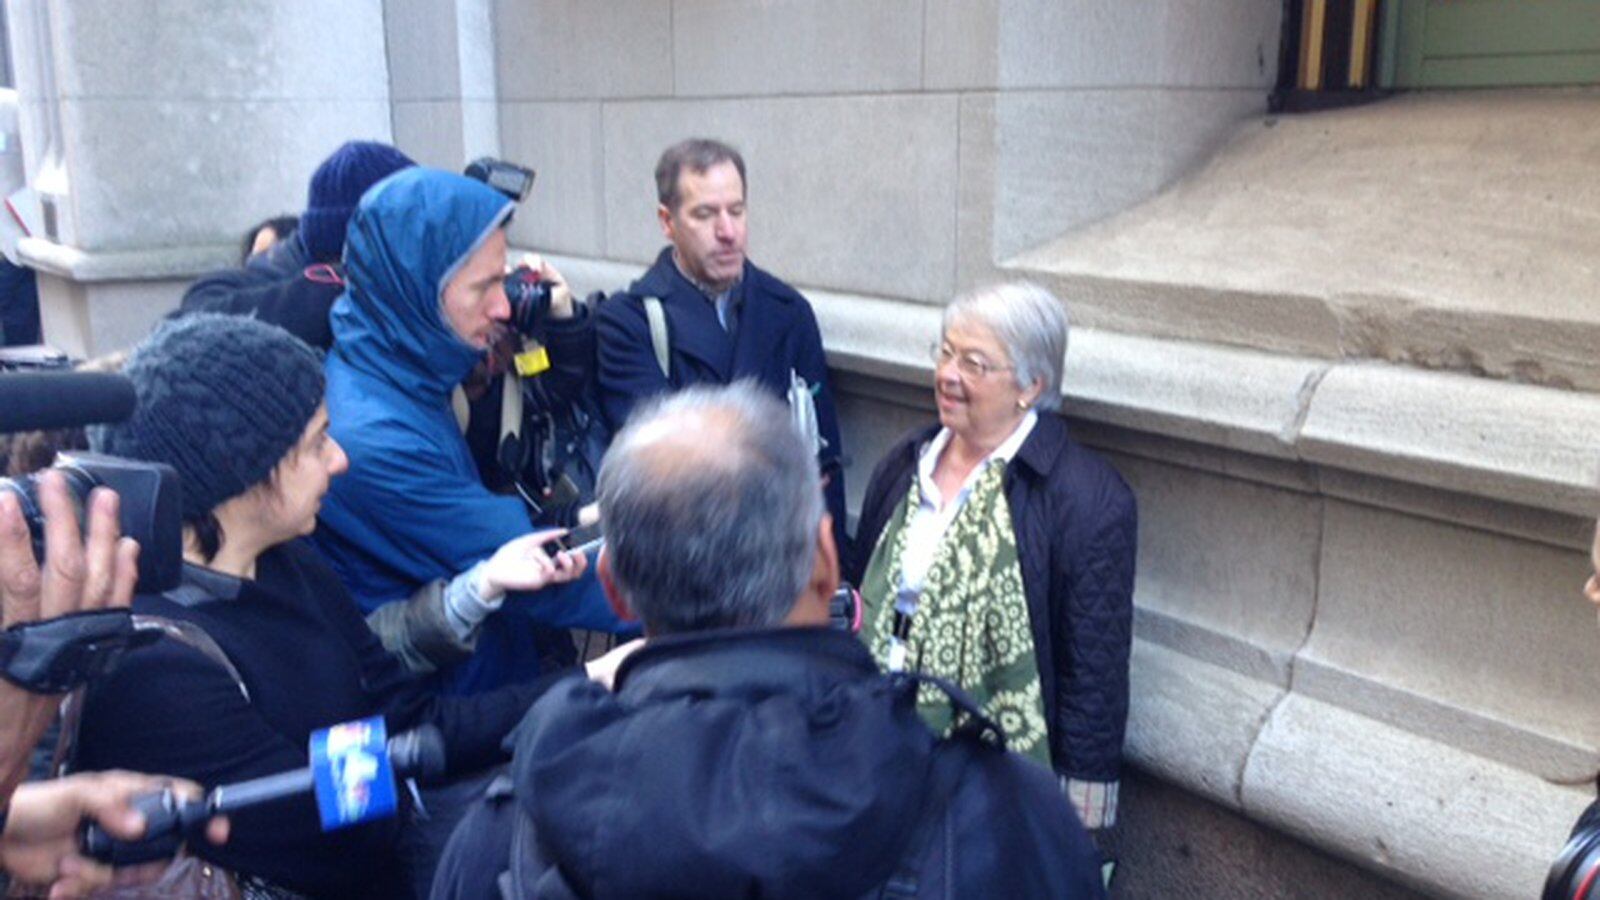 A larger press scrum than normal questions Chancellor Fariña after leaving a meeting with charter school leaders.